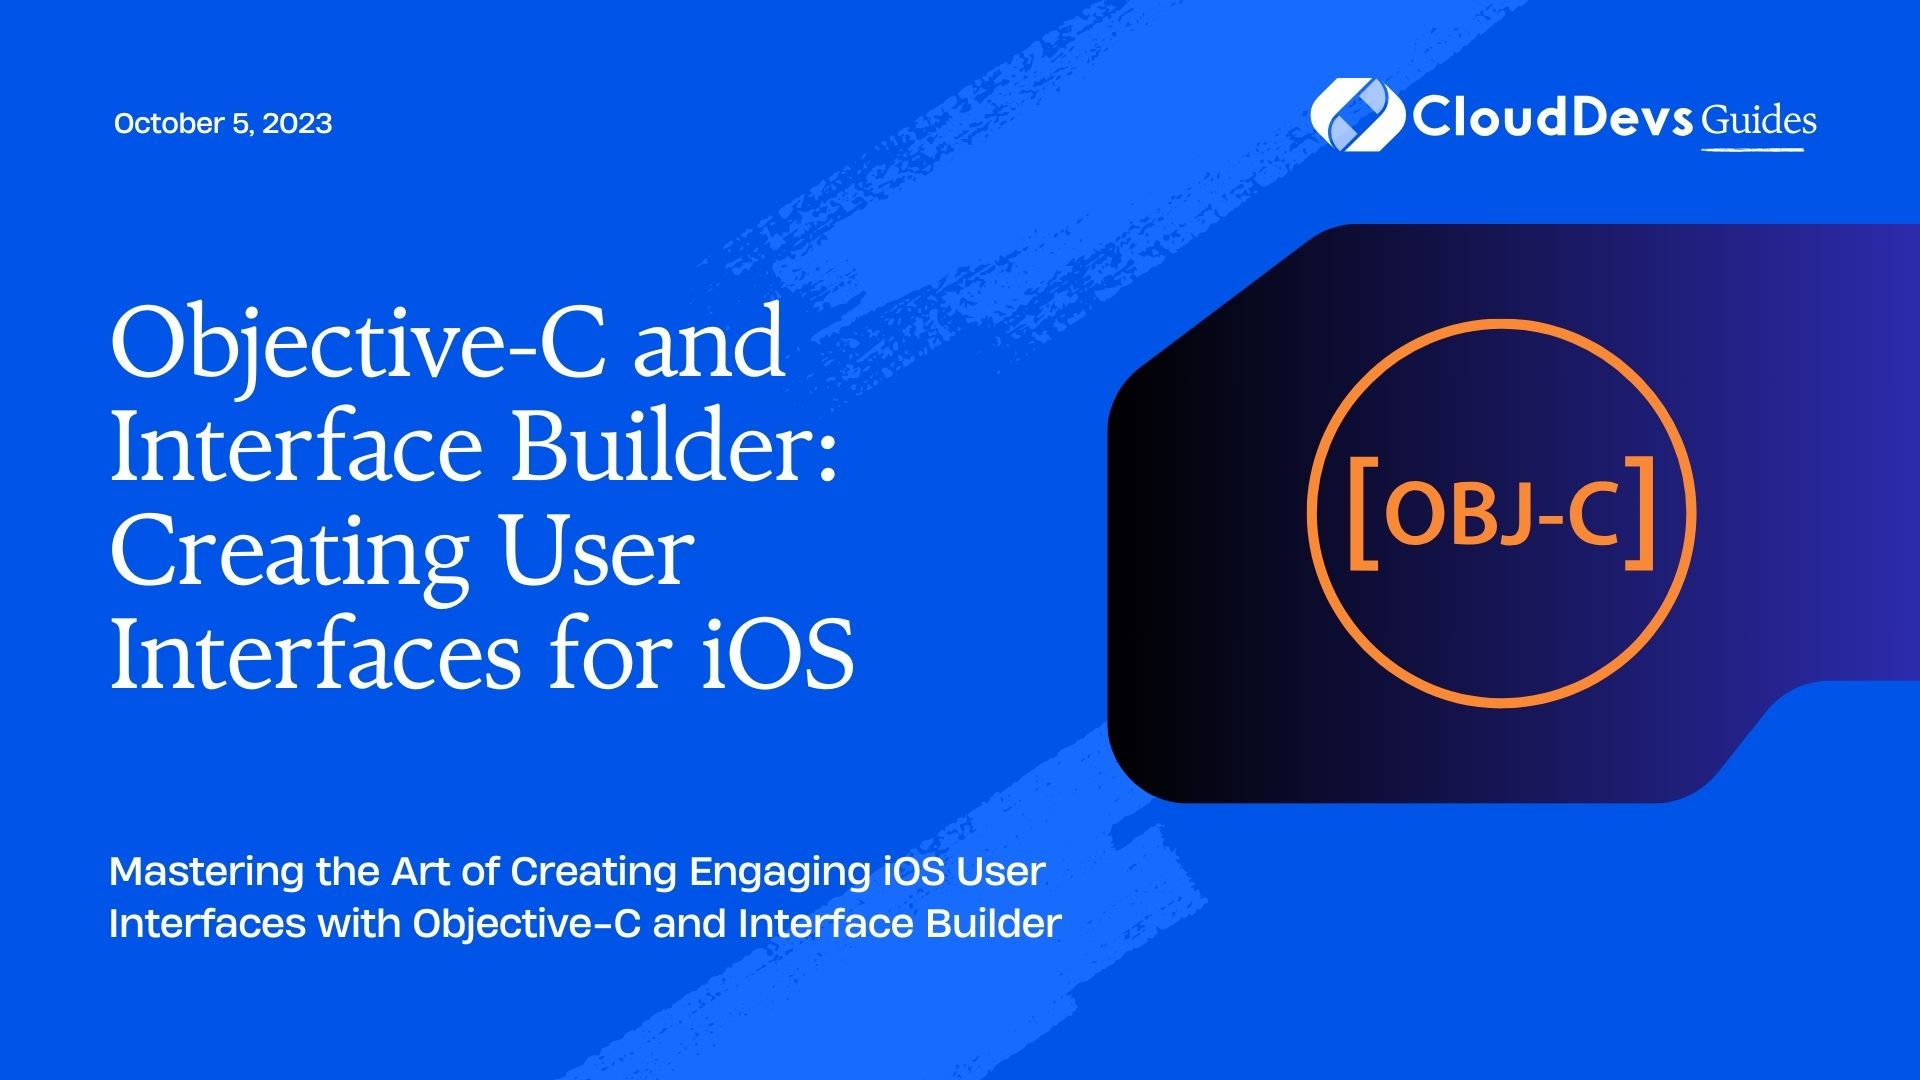 Objective-C and Interface Builder: Creating User Interfaces for iOS